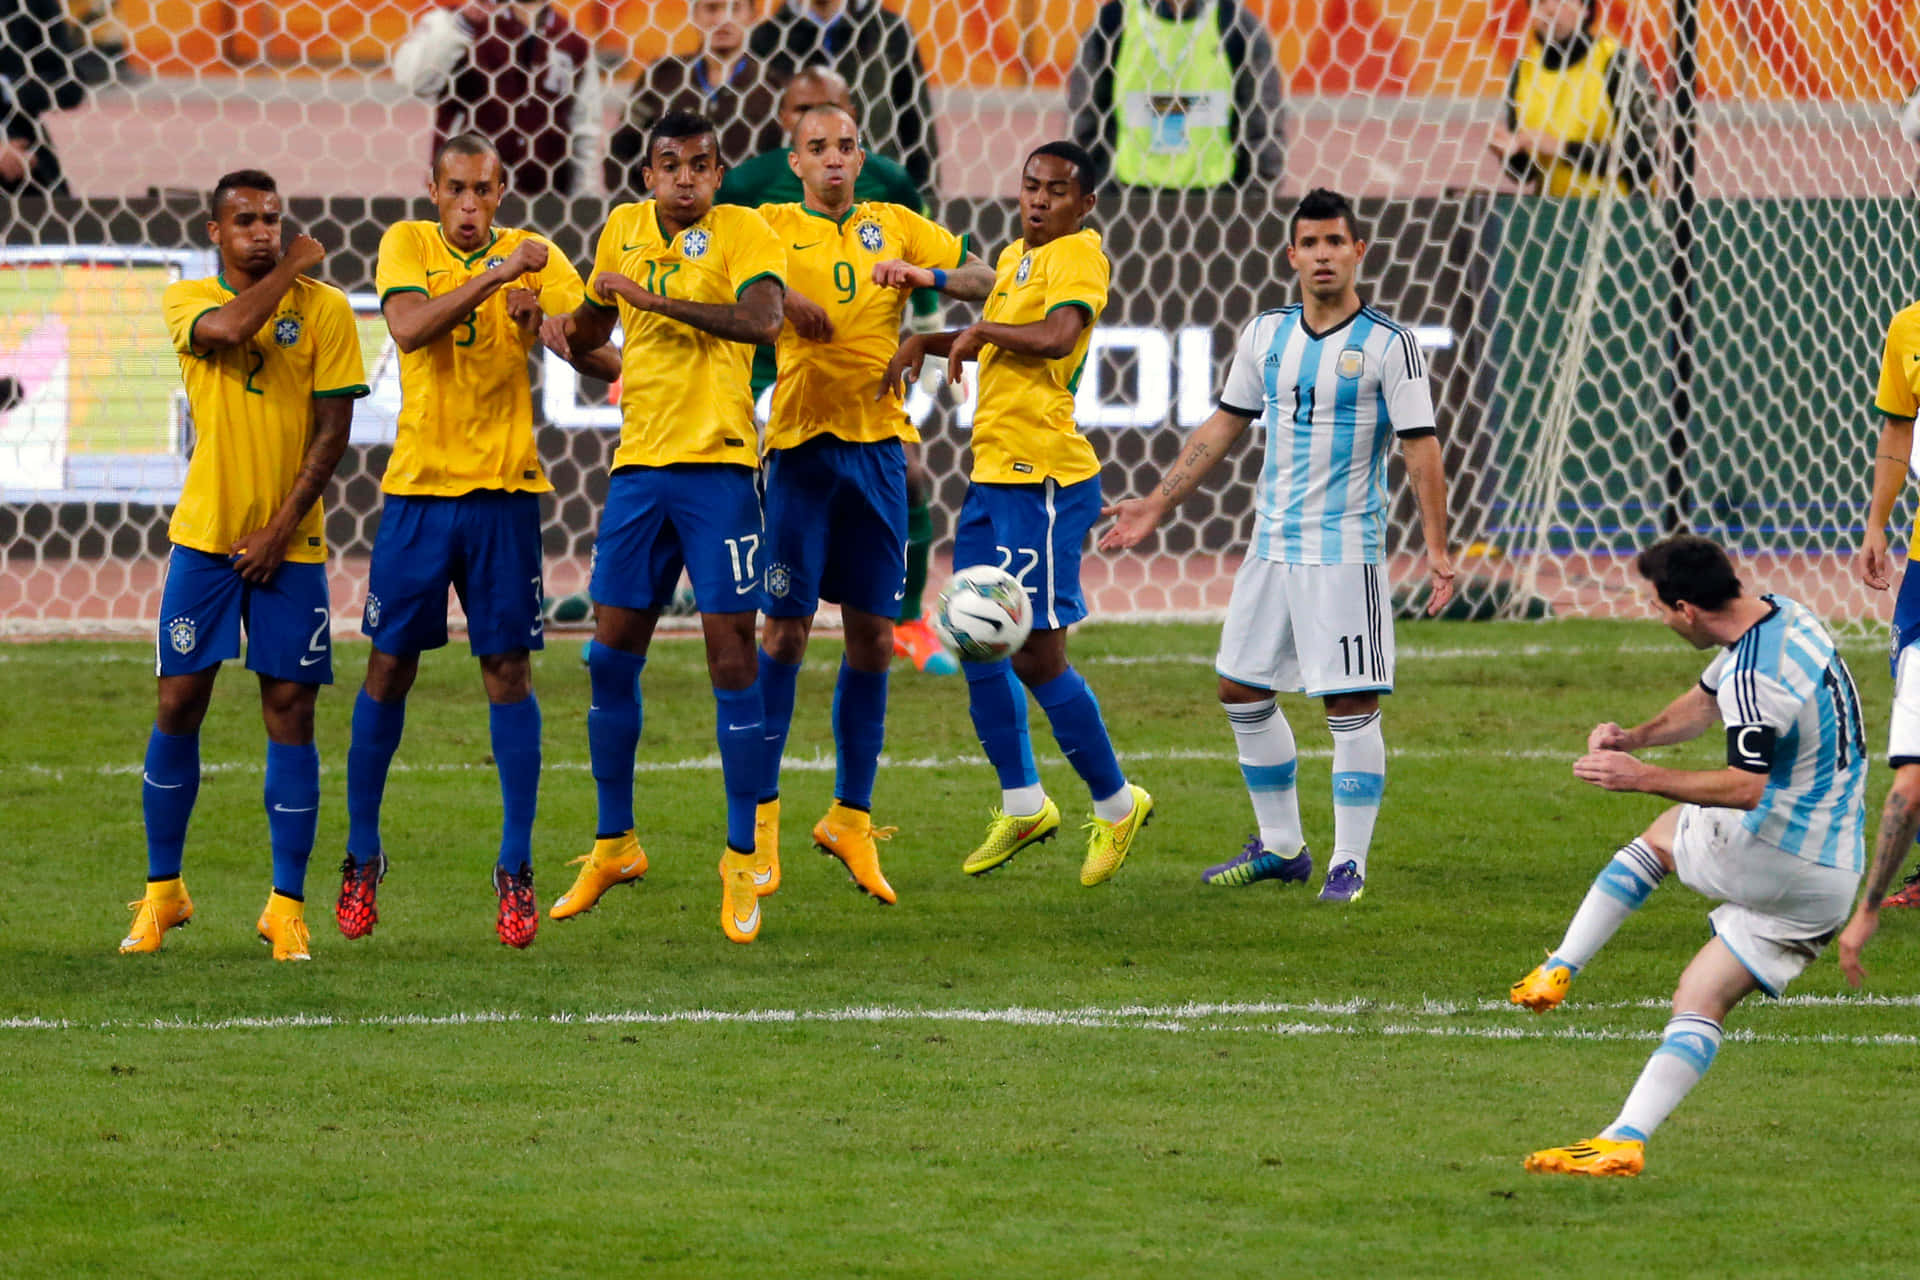 Stunning Moment Of Messi's Magnificent Free Kick Wallpaper